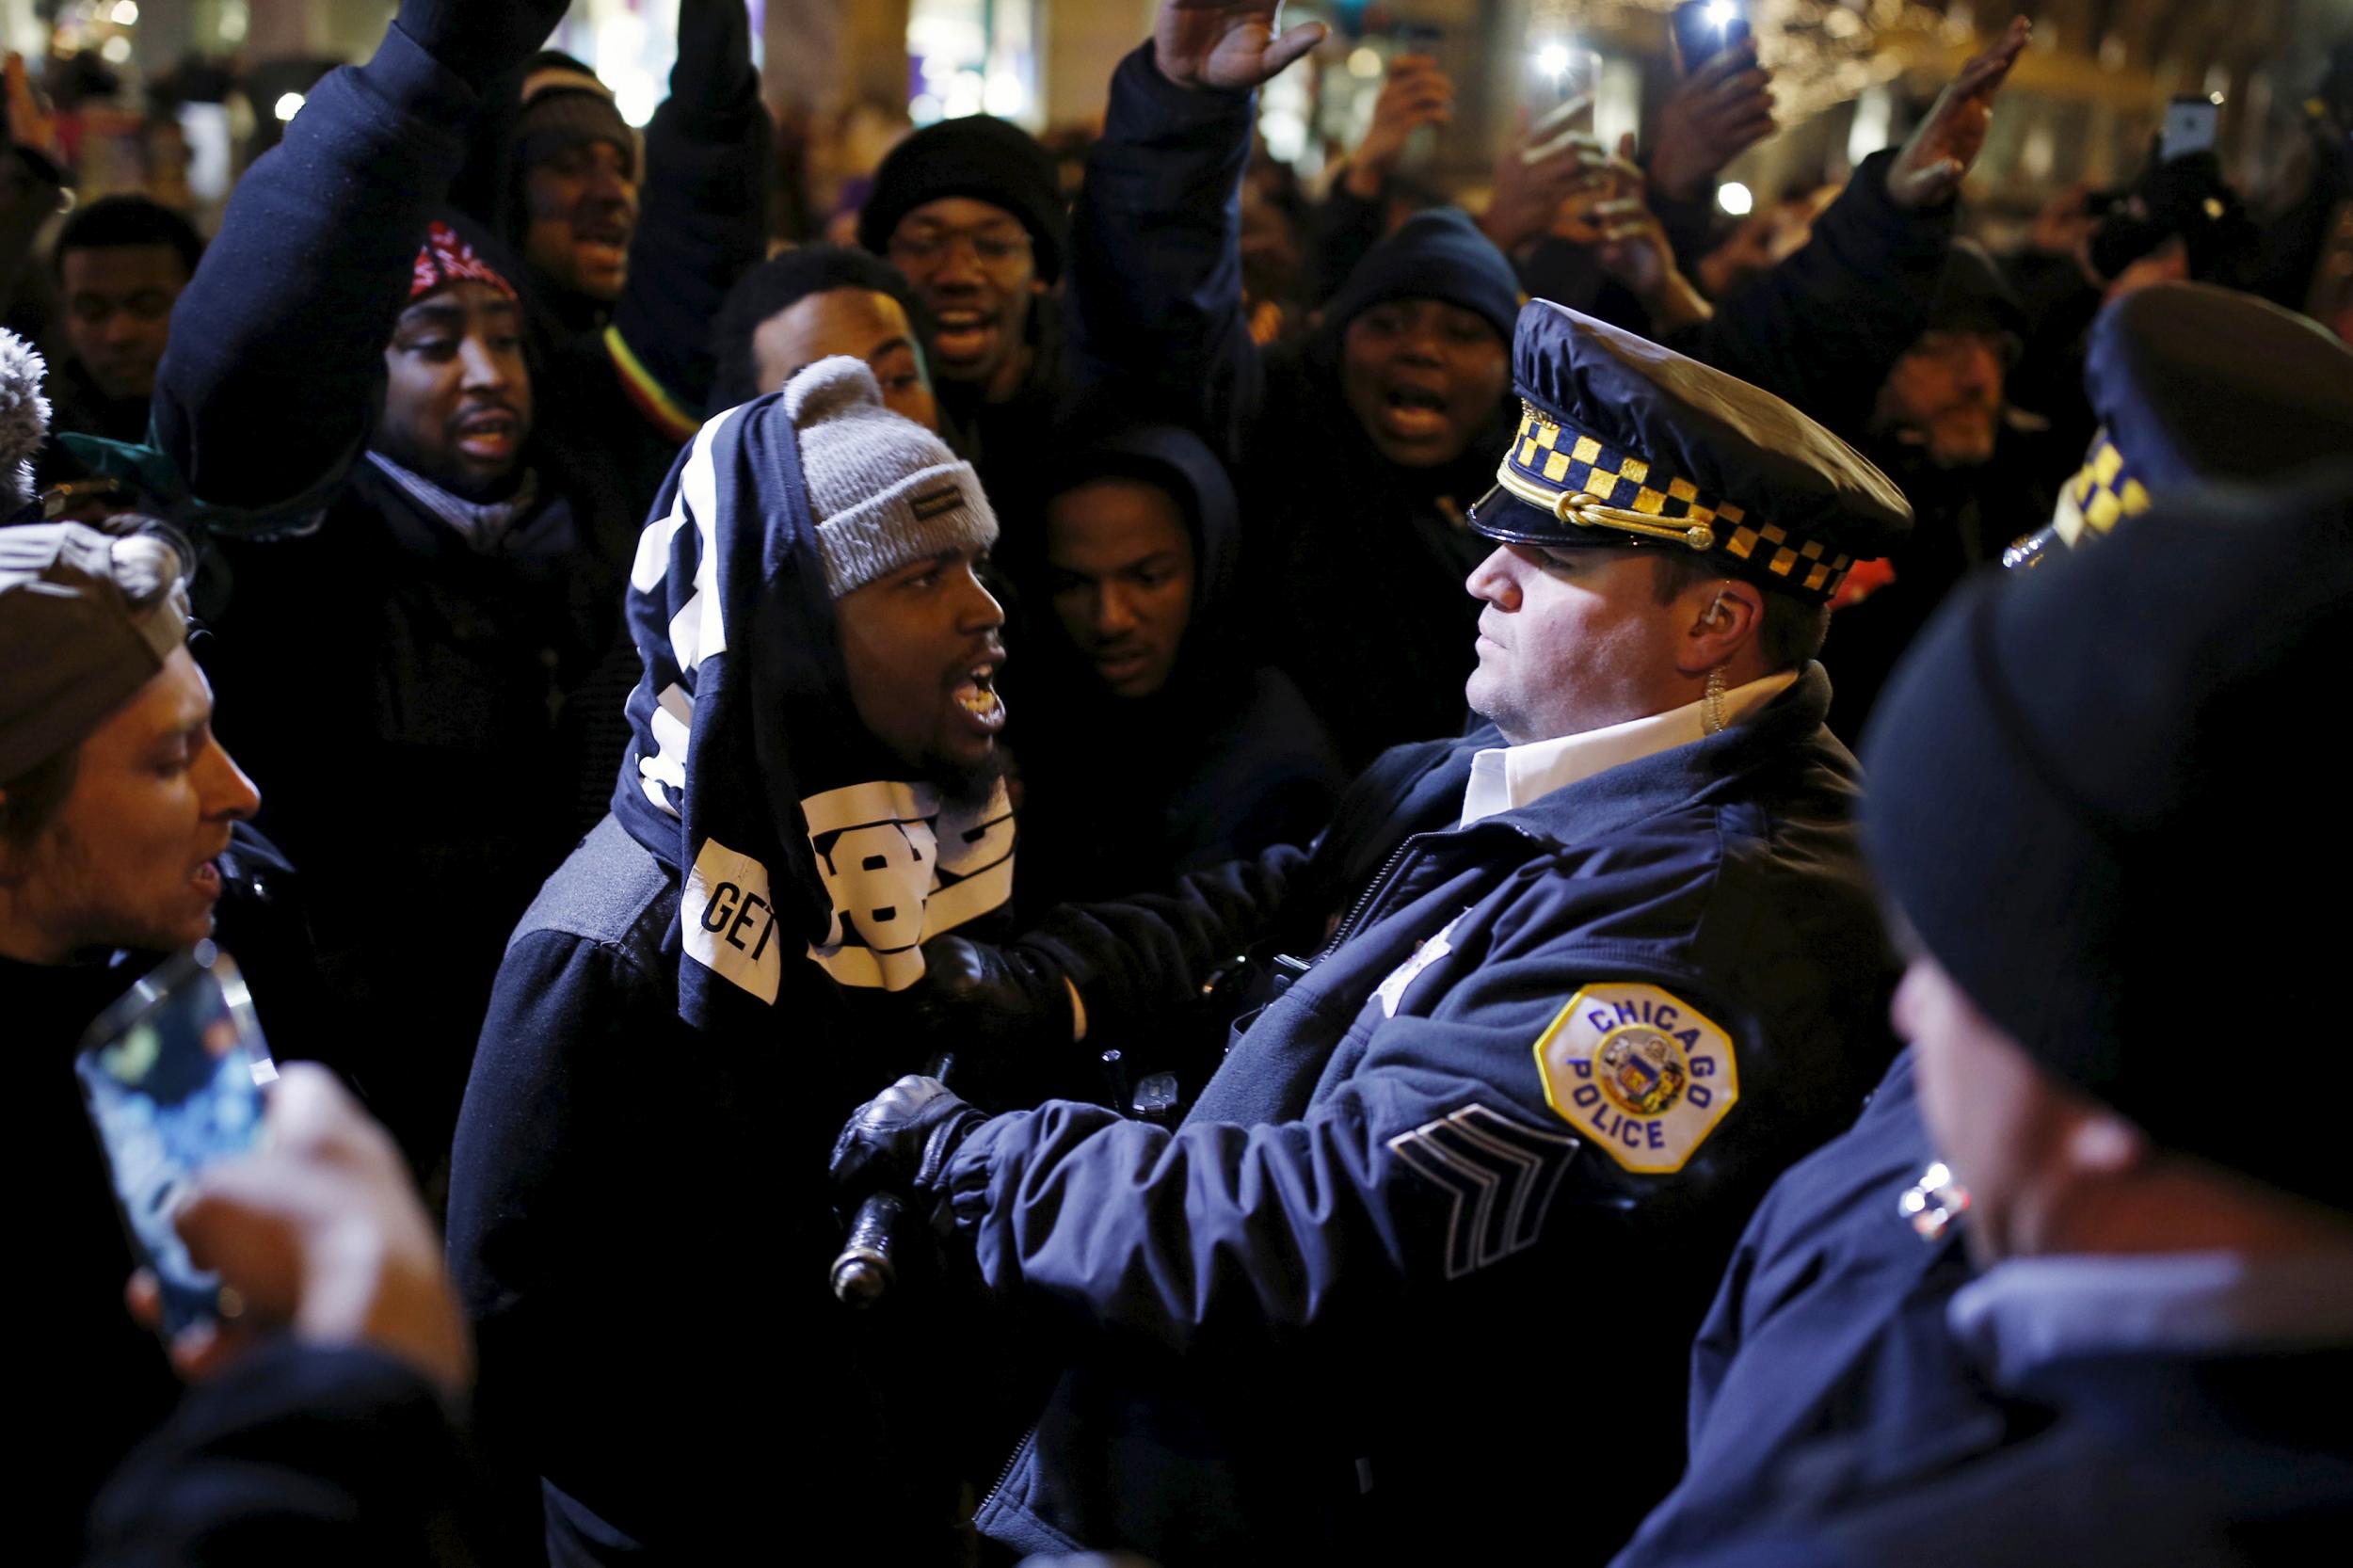 The fatal police shooting of teenager Laquan McDonald led to protests and outcry throughout Chicago, as seen in this 28 November 2015 photo. But there's no telling what citywide response the officer's murder trial will bring.